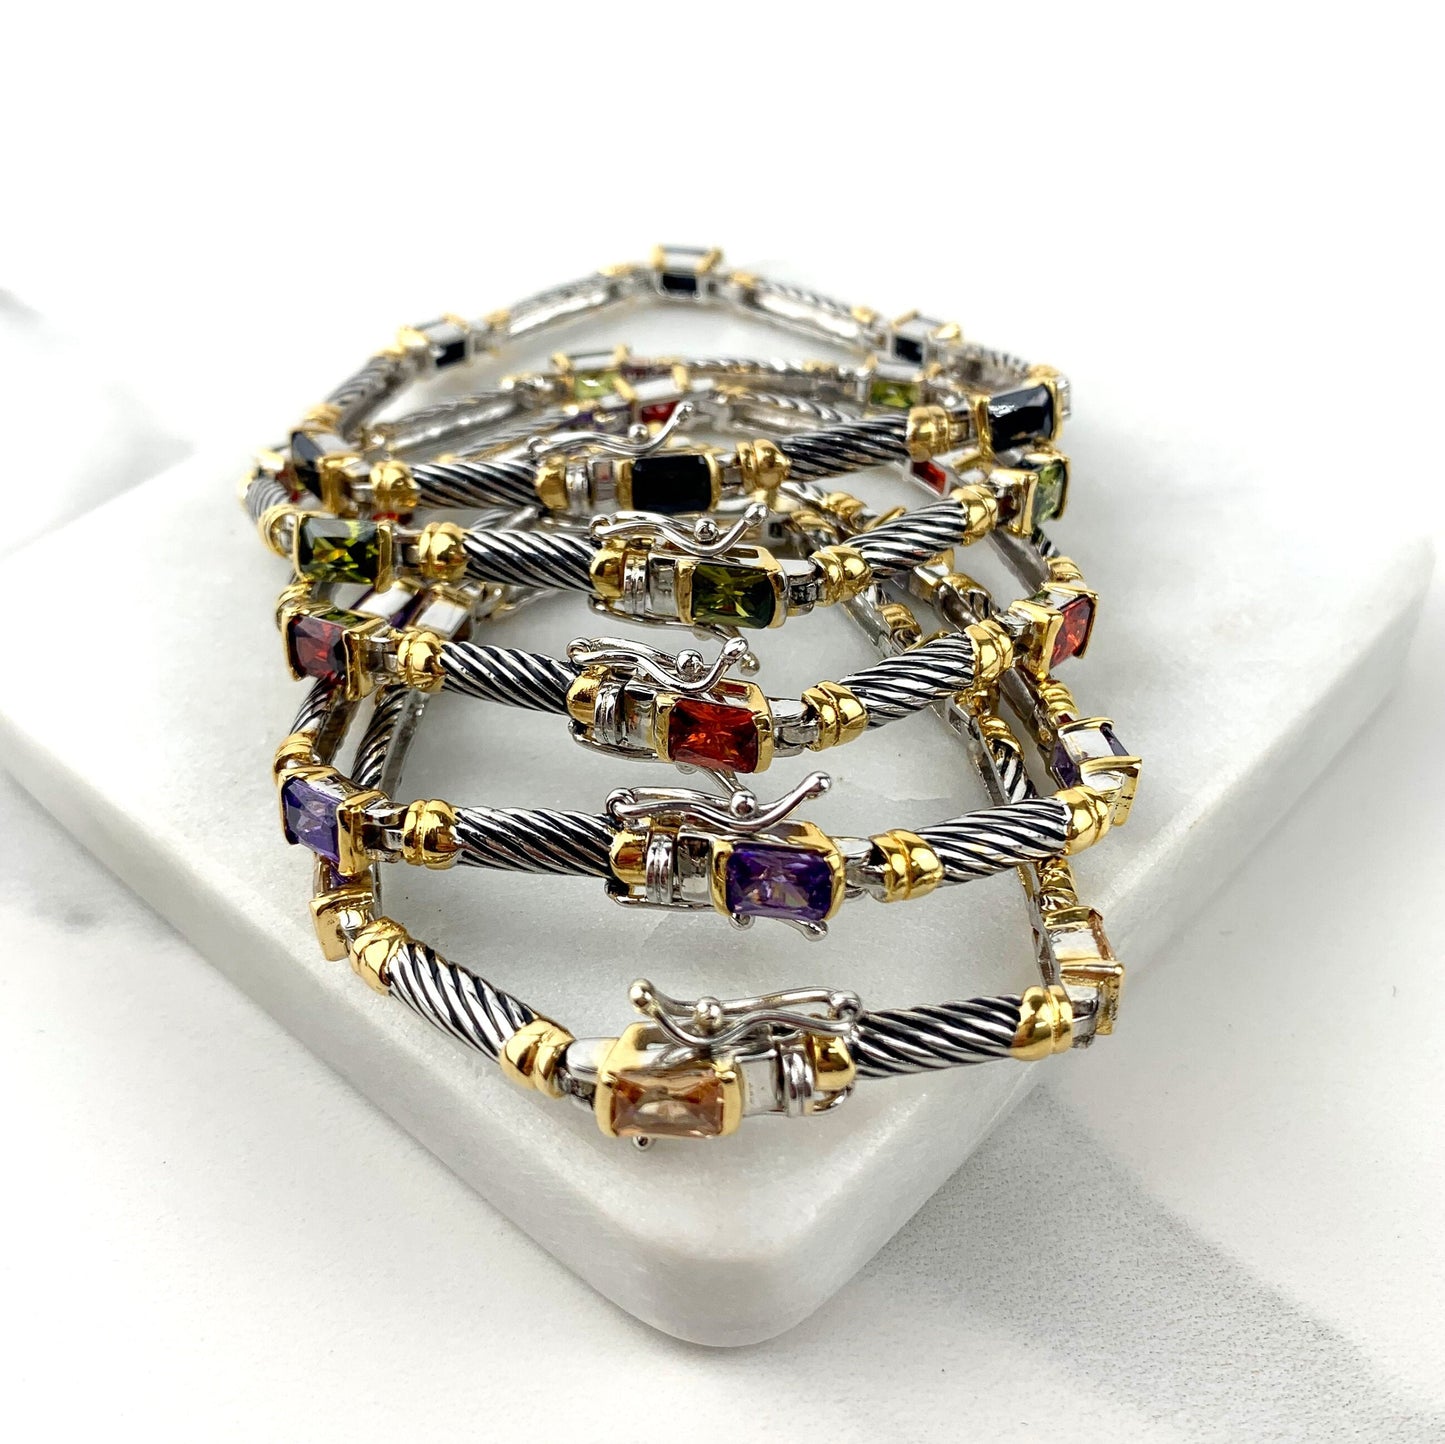 Rhodium Plated Antiqued Spiral Link with Red, Purple, Black,Green or Yellow, Cubic Zirconia Bracelet, Wholesale Jewelry Supplies